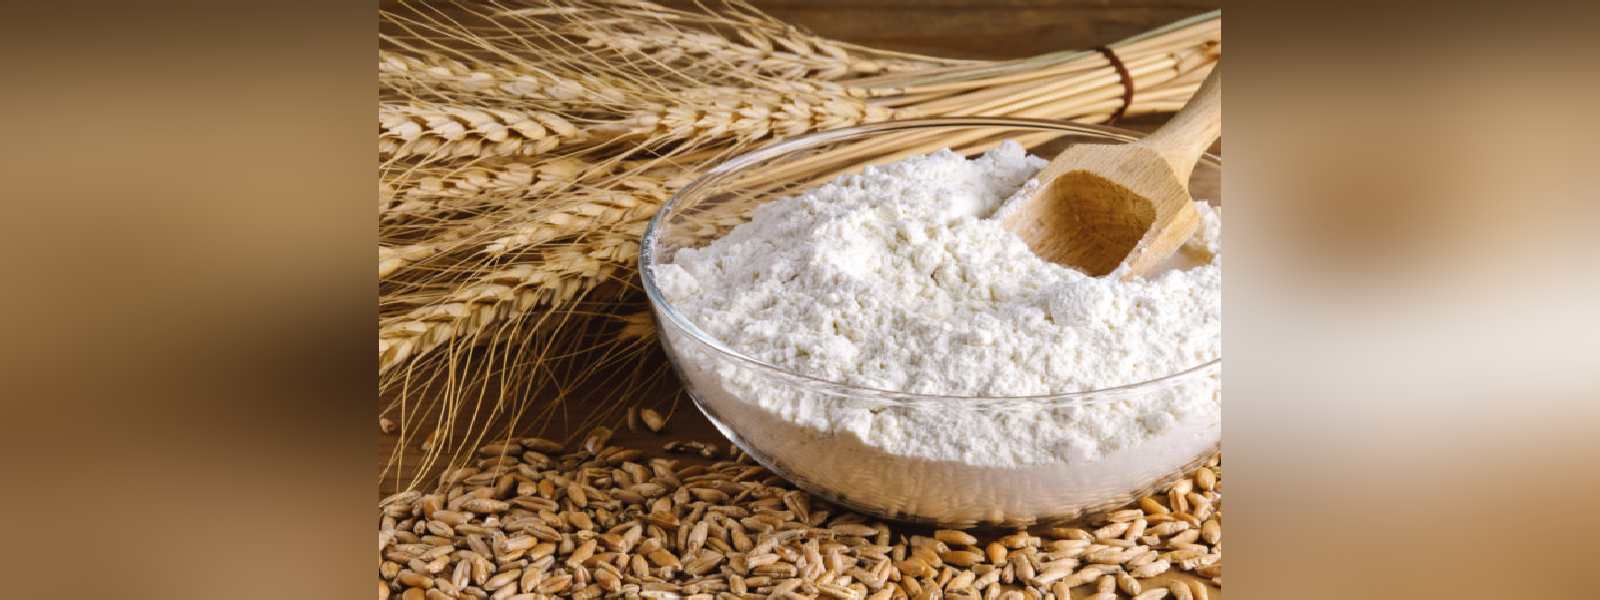 CAA requested to increase price of Wheat Flour